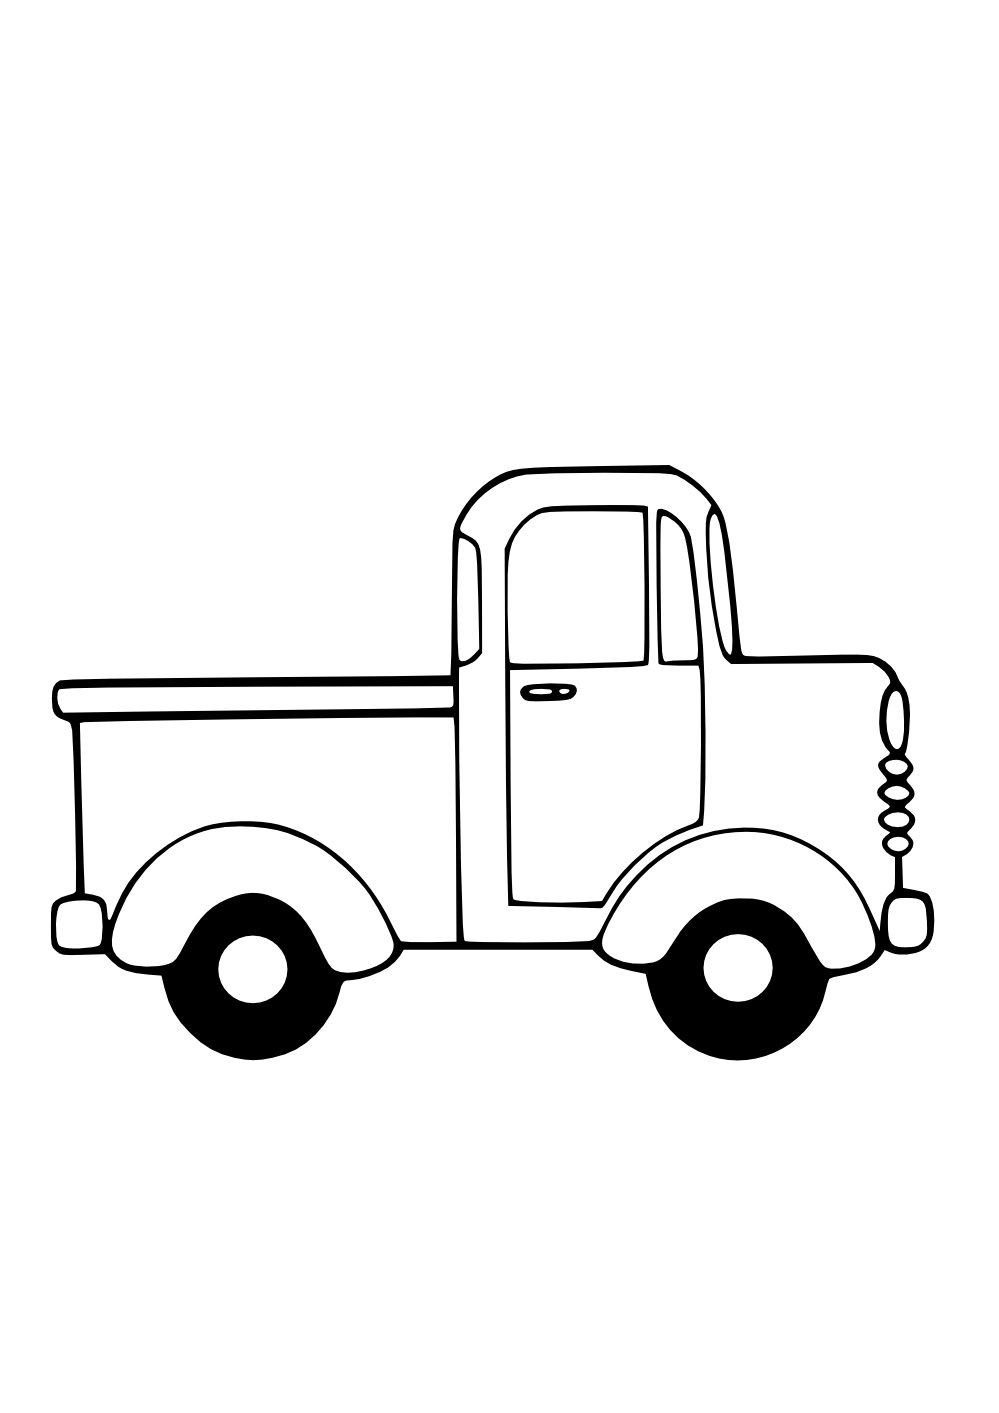 Truck black and white. Fireman clipart colouring page